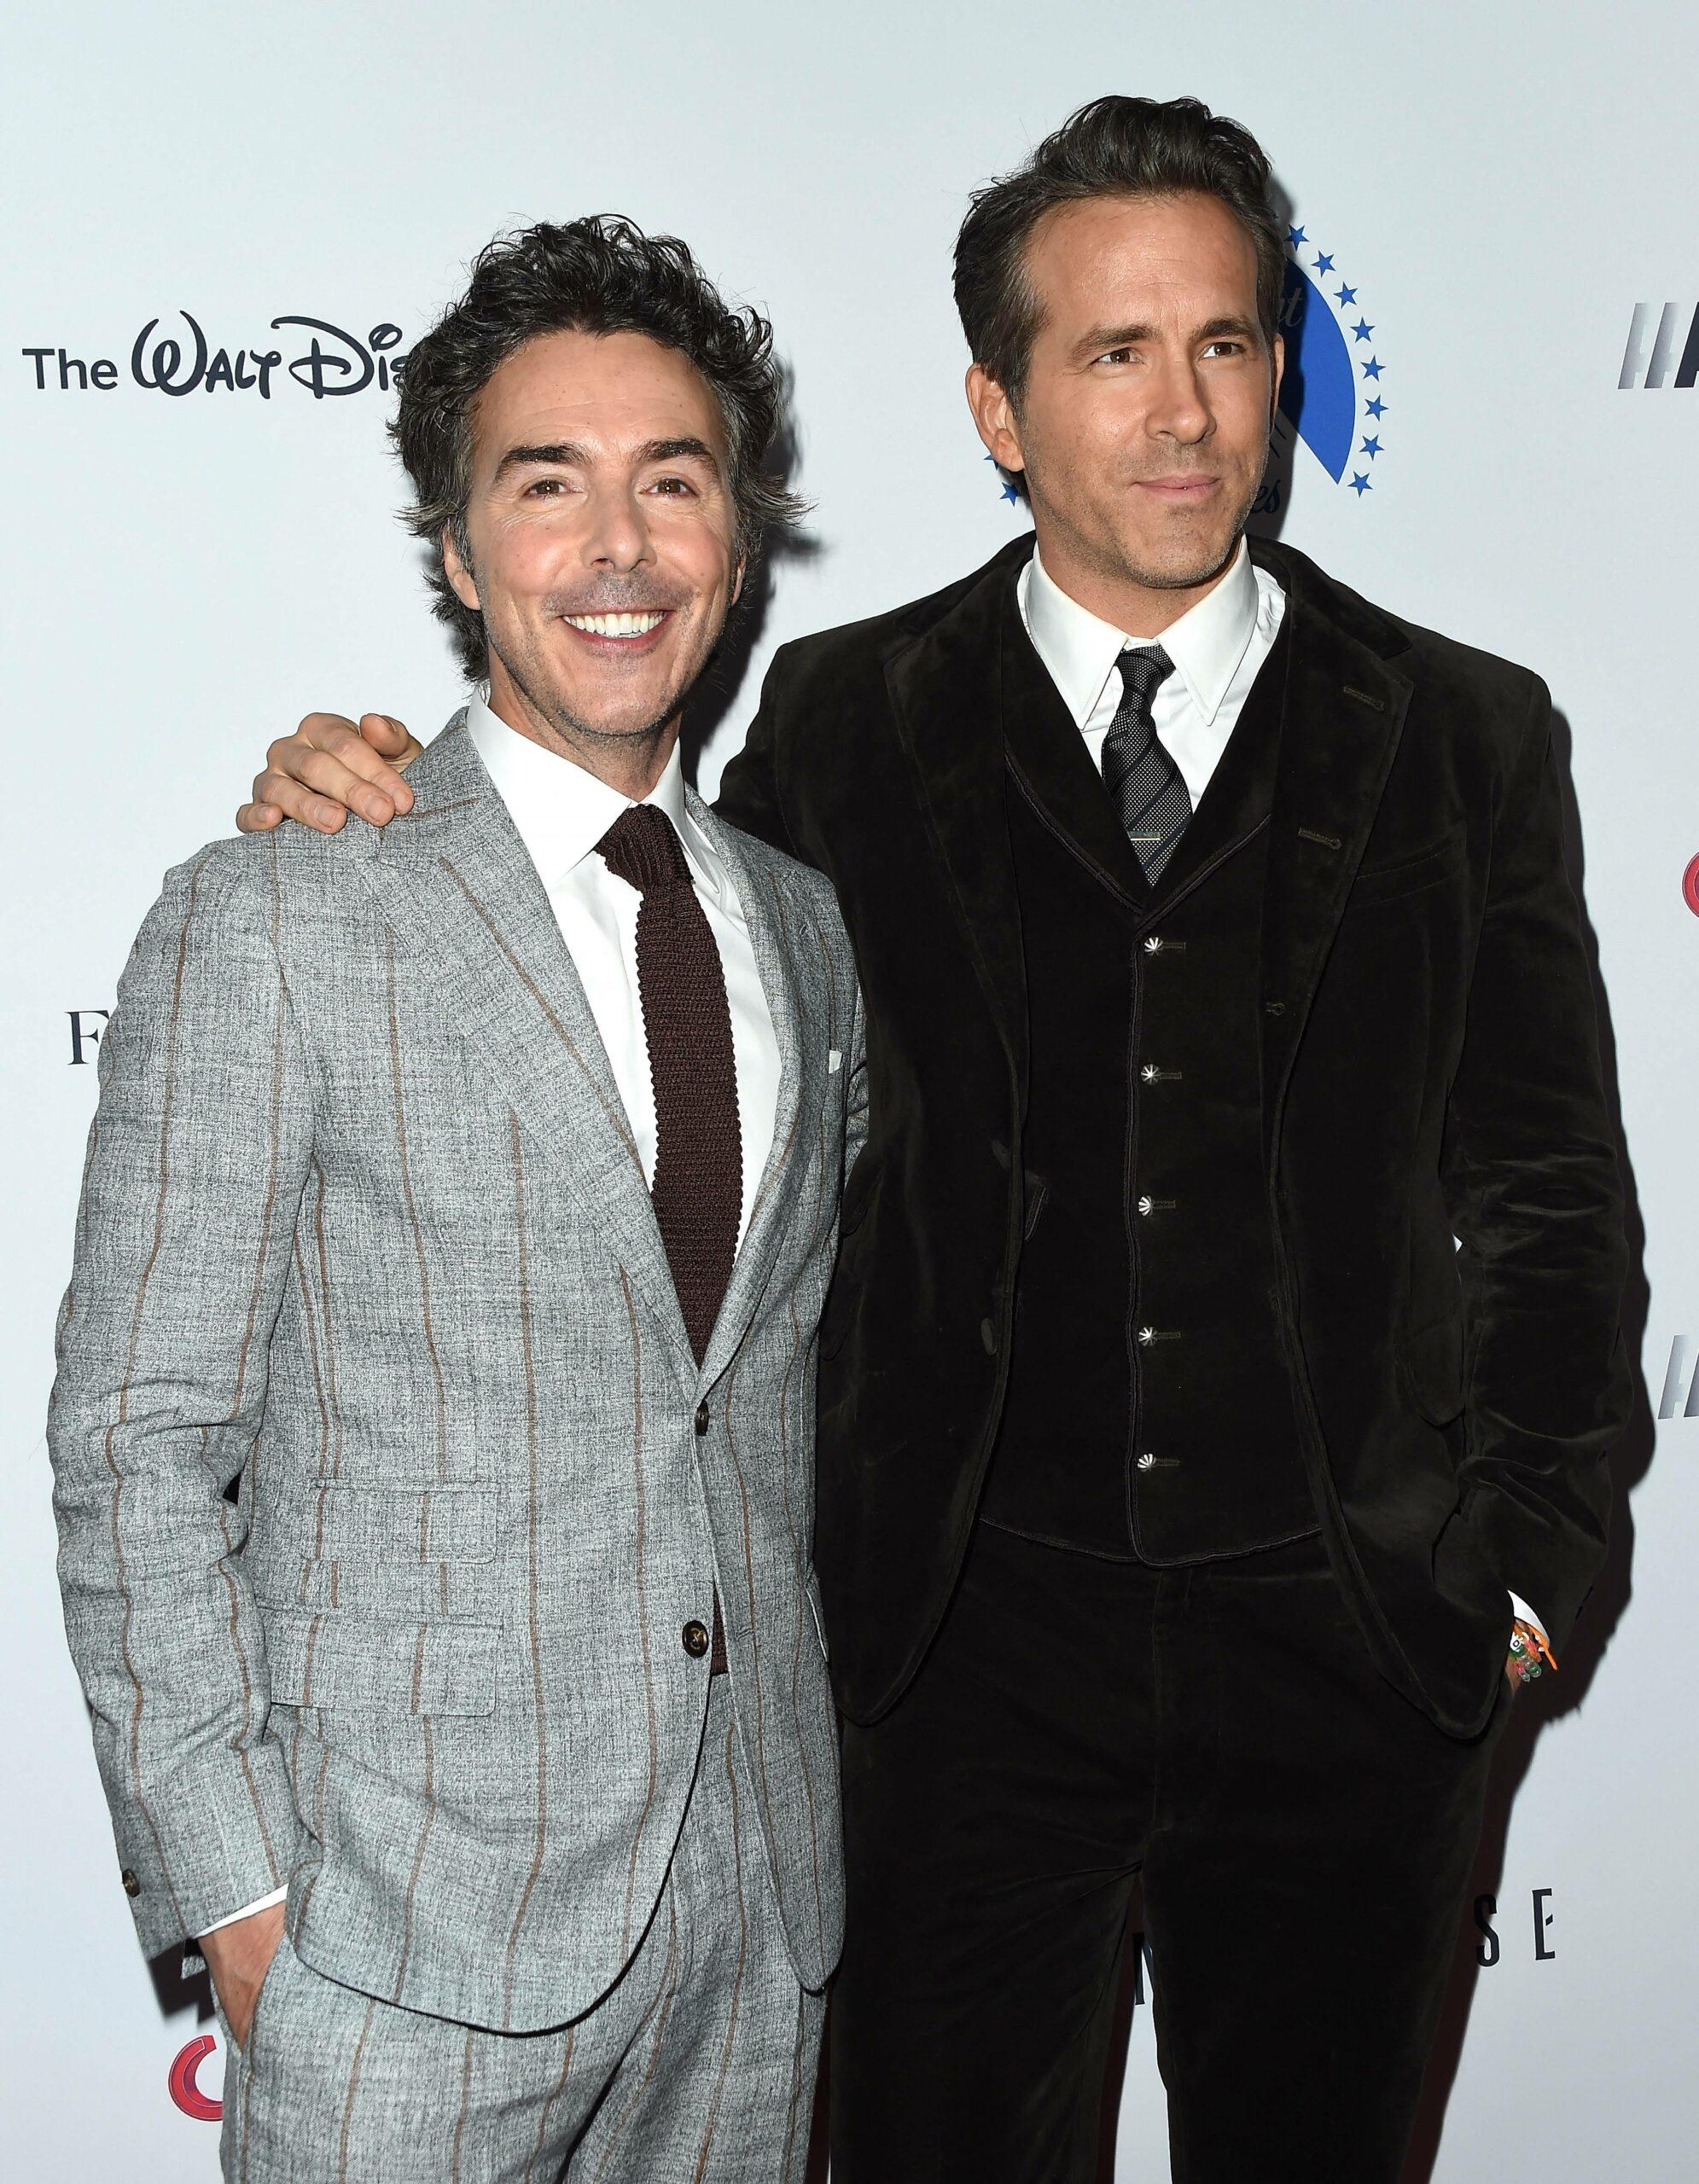 Shawn Levy and Ryan Reynolds at the American Cinematheque Awards Honoring Ryan Reynolds